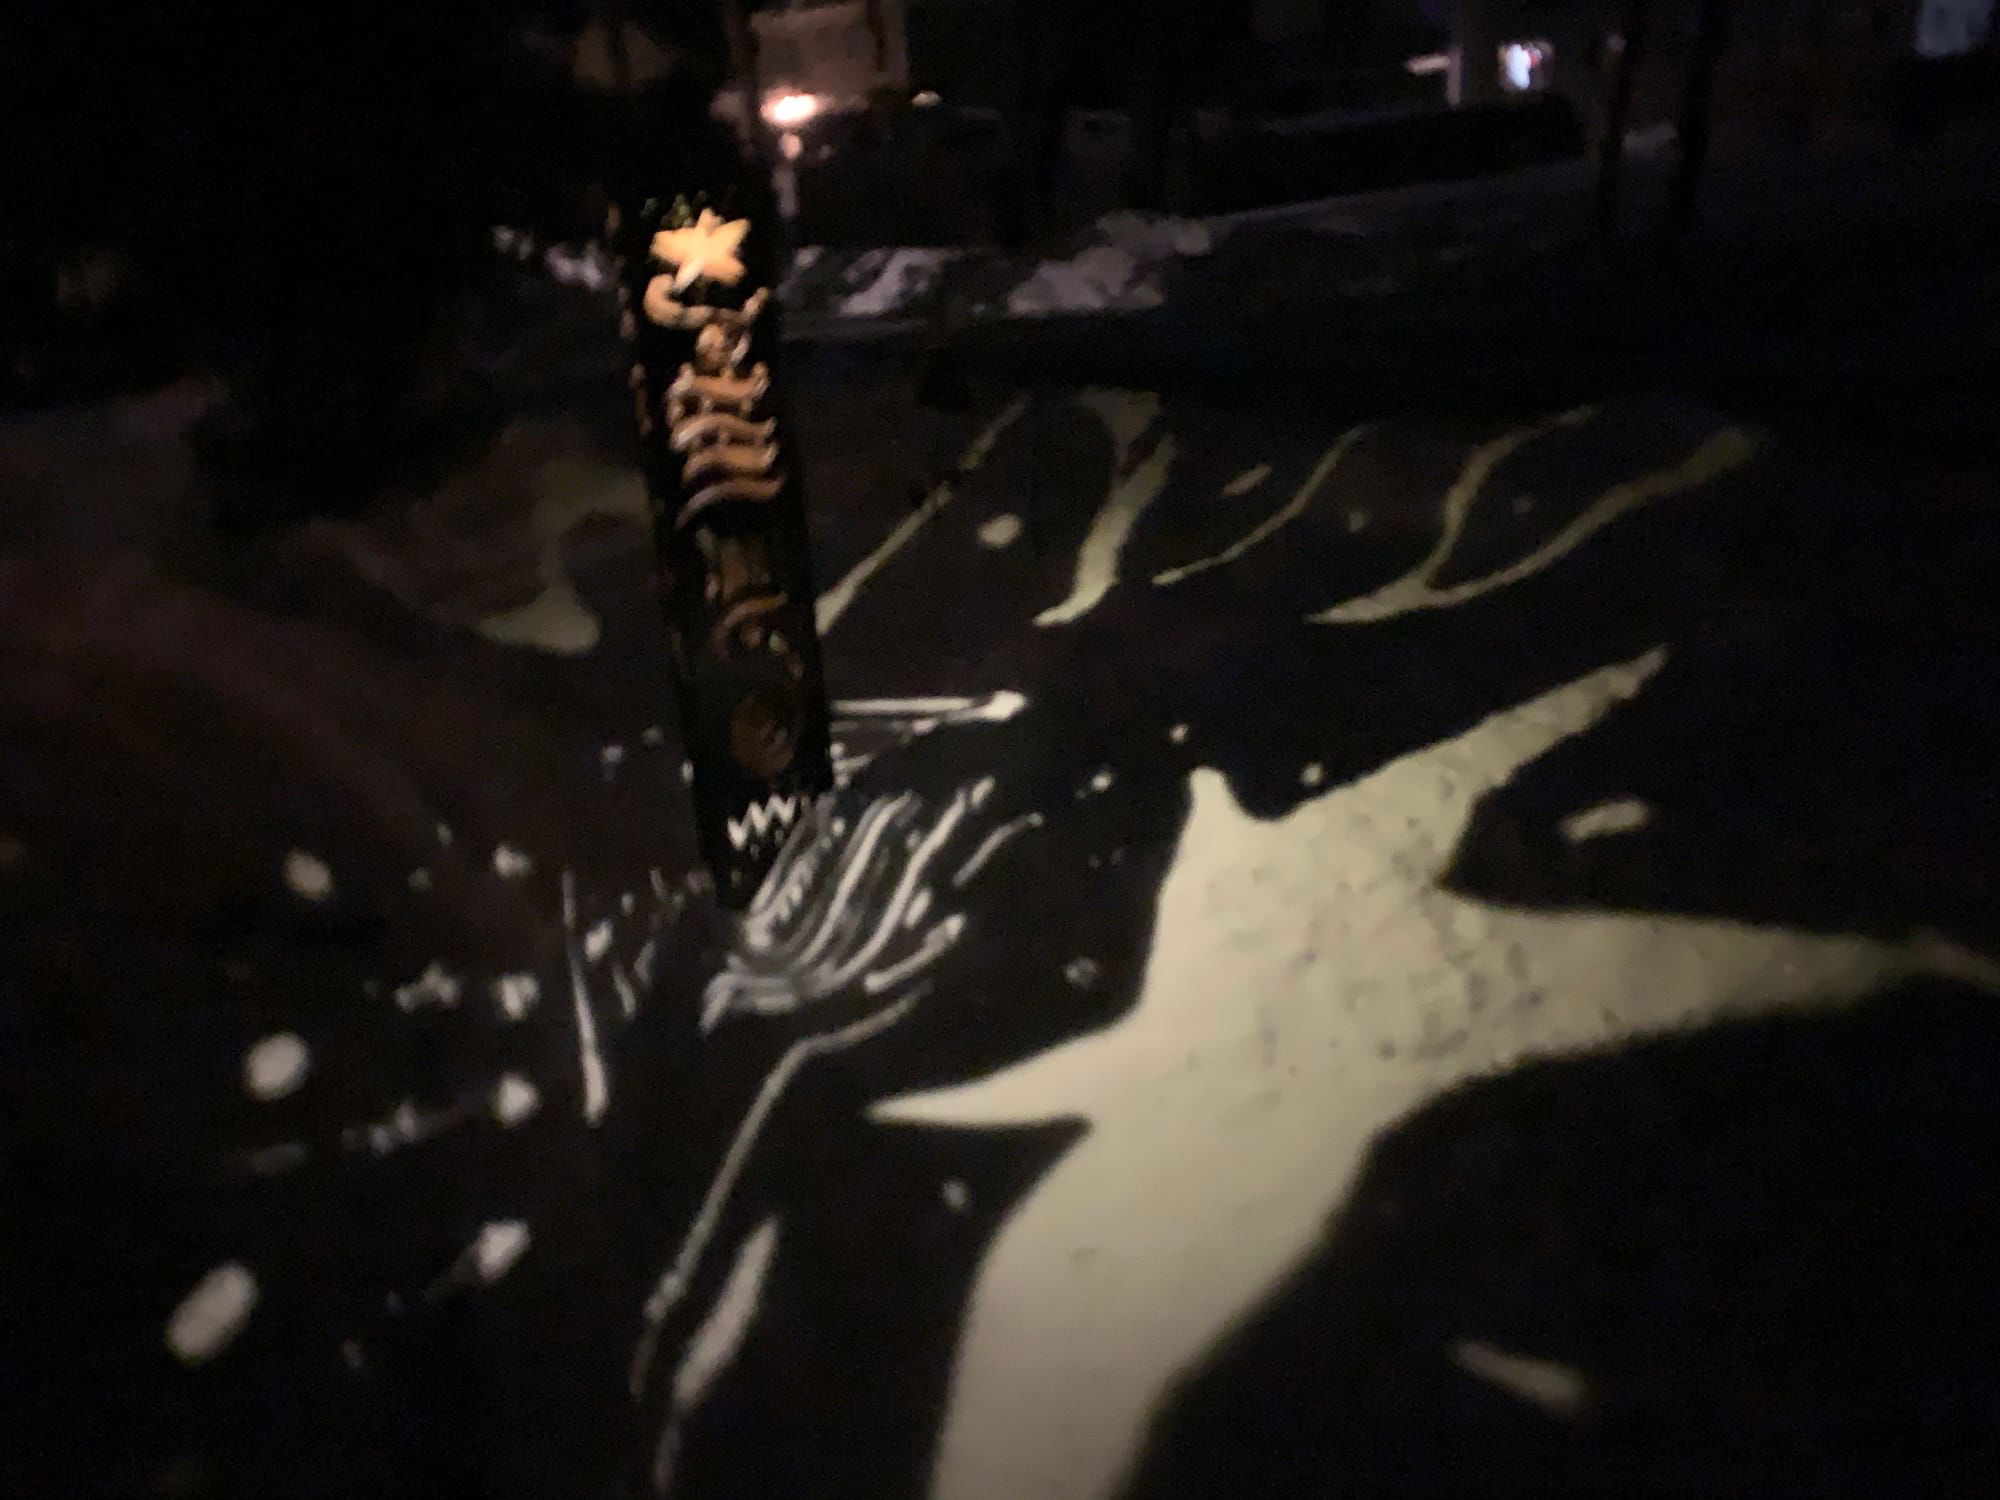 Projected light image from Star Luminary on the snow.